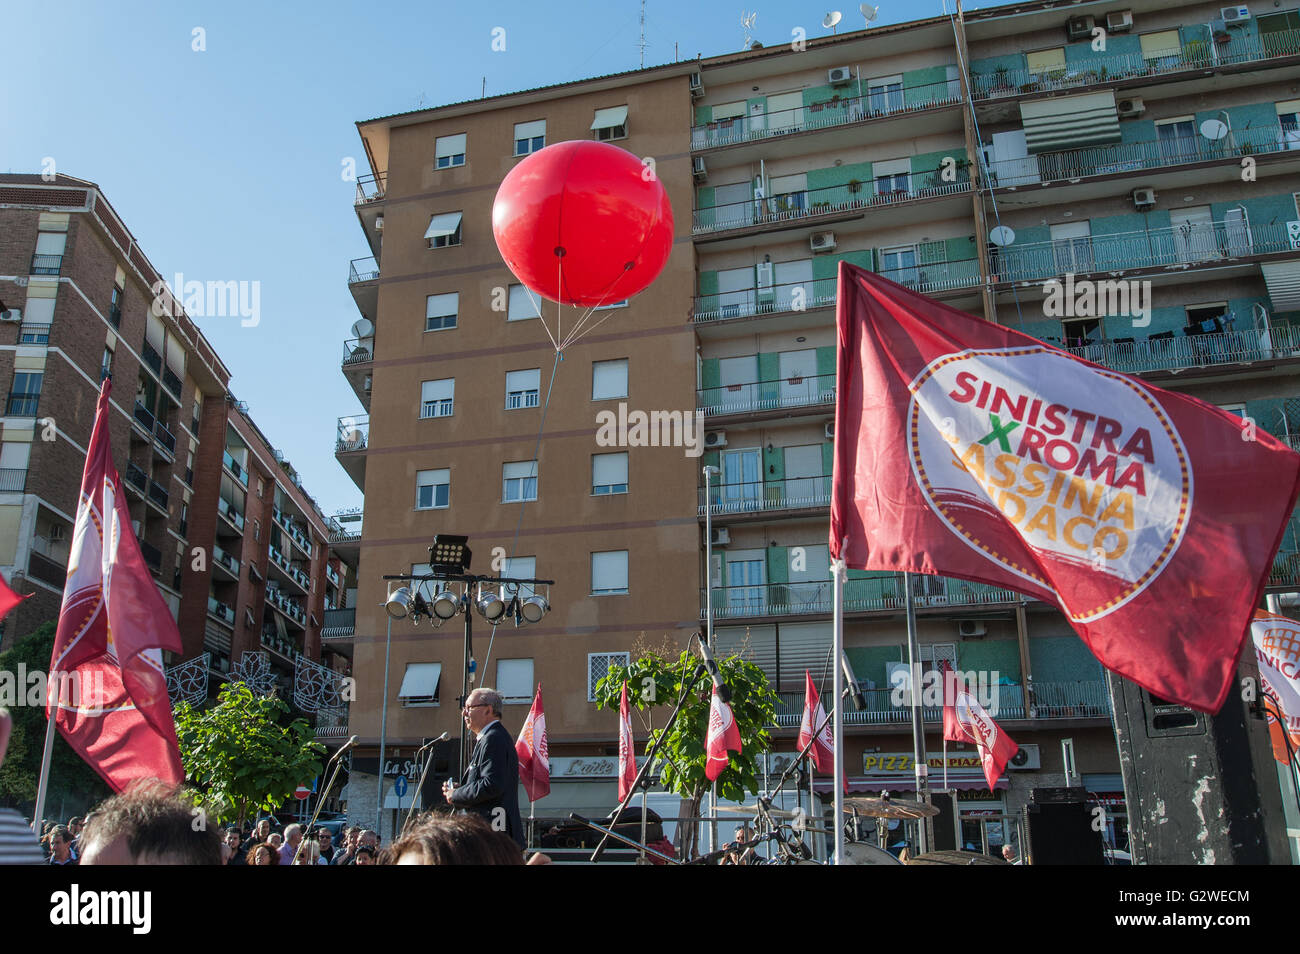 Rome, Italy. 03rd June, 2016. Banner use during the closing speech of Stefano Fassina candidate for mayor of Rome for the Left lists and for Civic Fassina Mayor, in the popular neighborhood of Centocelle. © Leo Claudio De Petris/Pacific Press/Alamy Live News Stock Photo